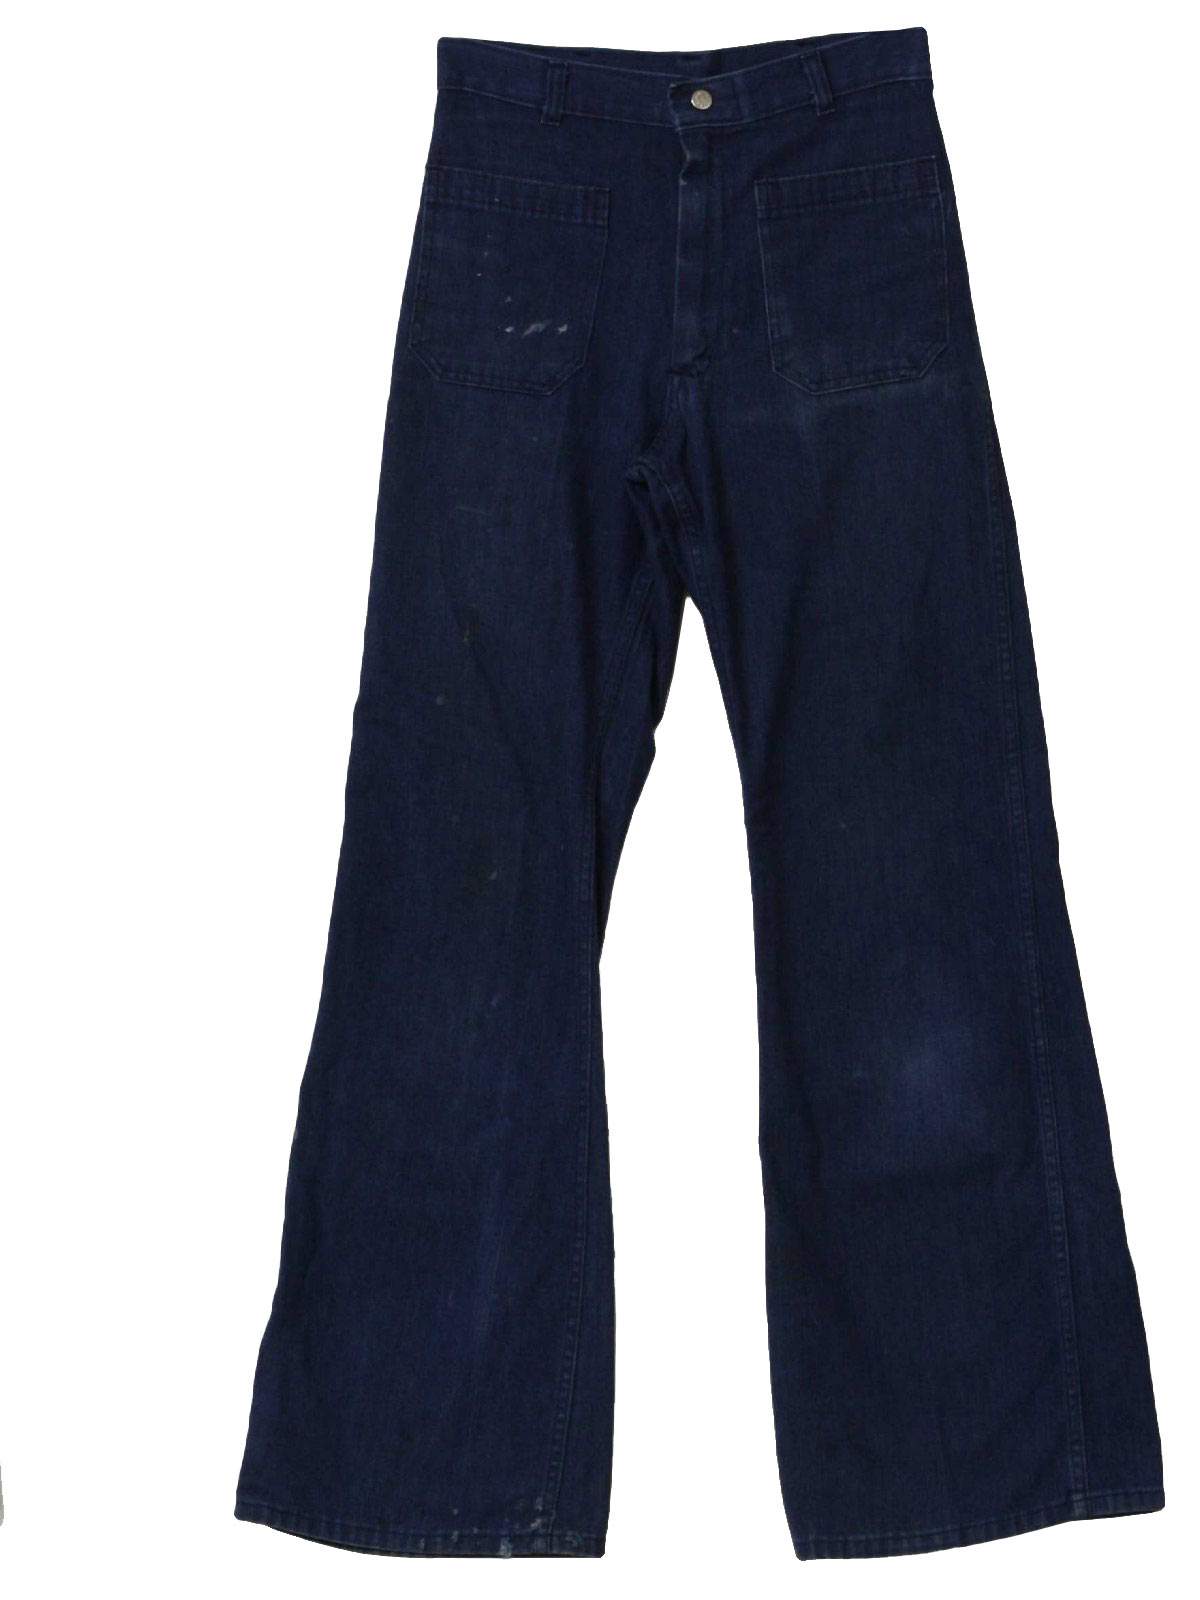 70's Vintage Bellbottom Pants: 70s -Navdungaree- Mens blue cotton and ...